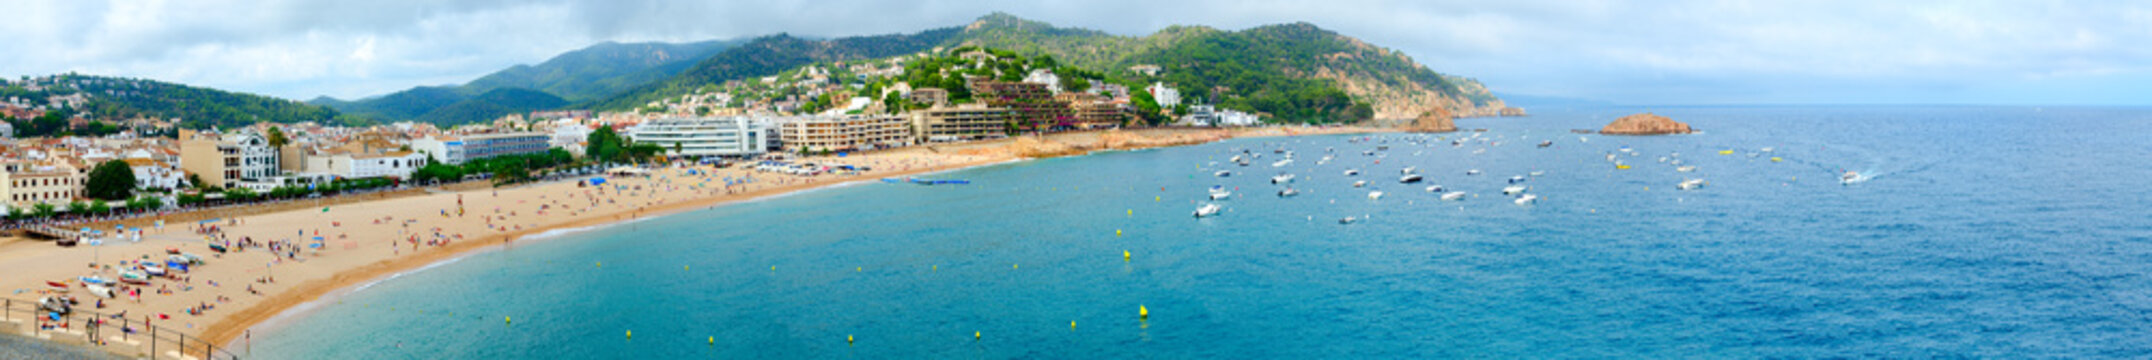 Beautiful panoramic view from above on resort town of Tossa de Mar, Costa Brava, Spain